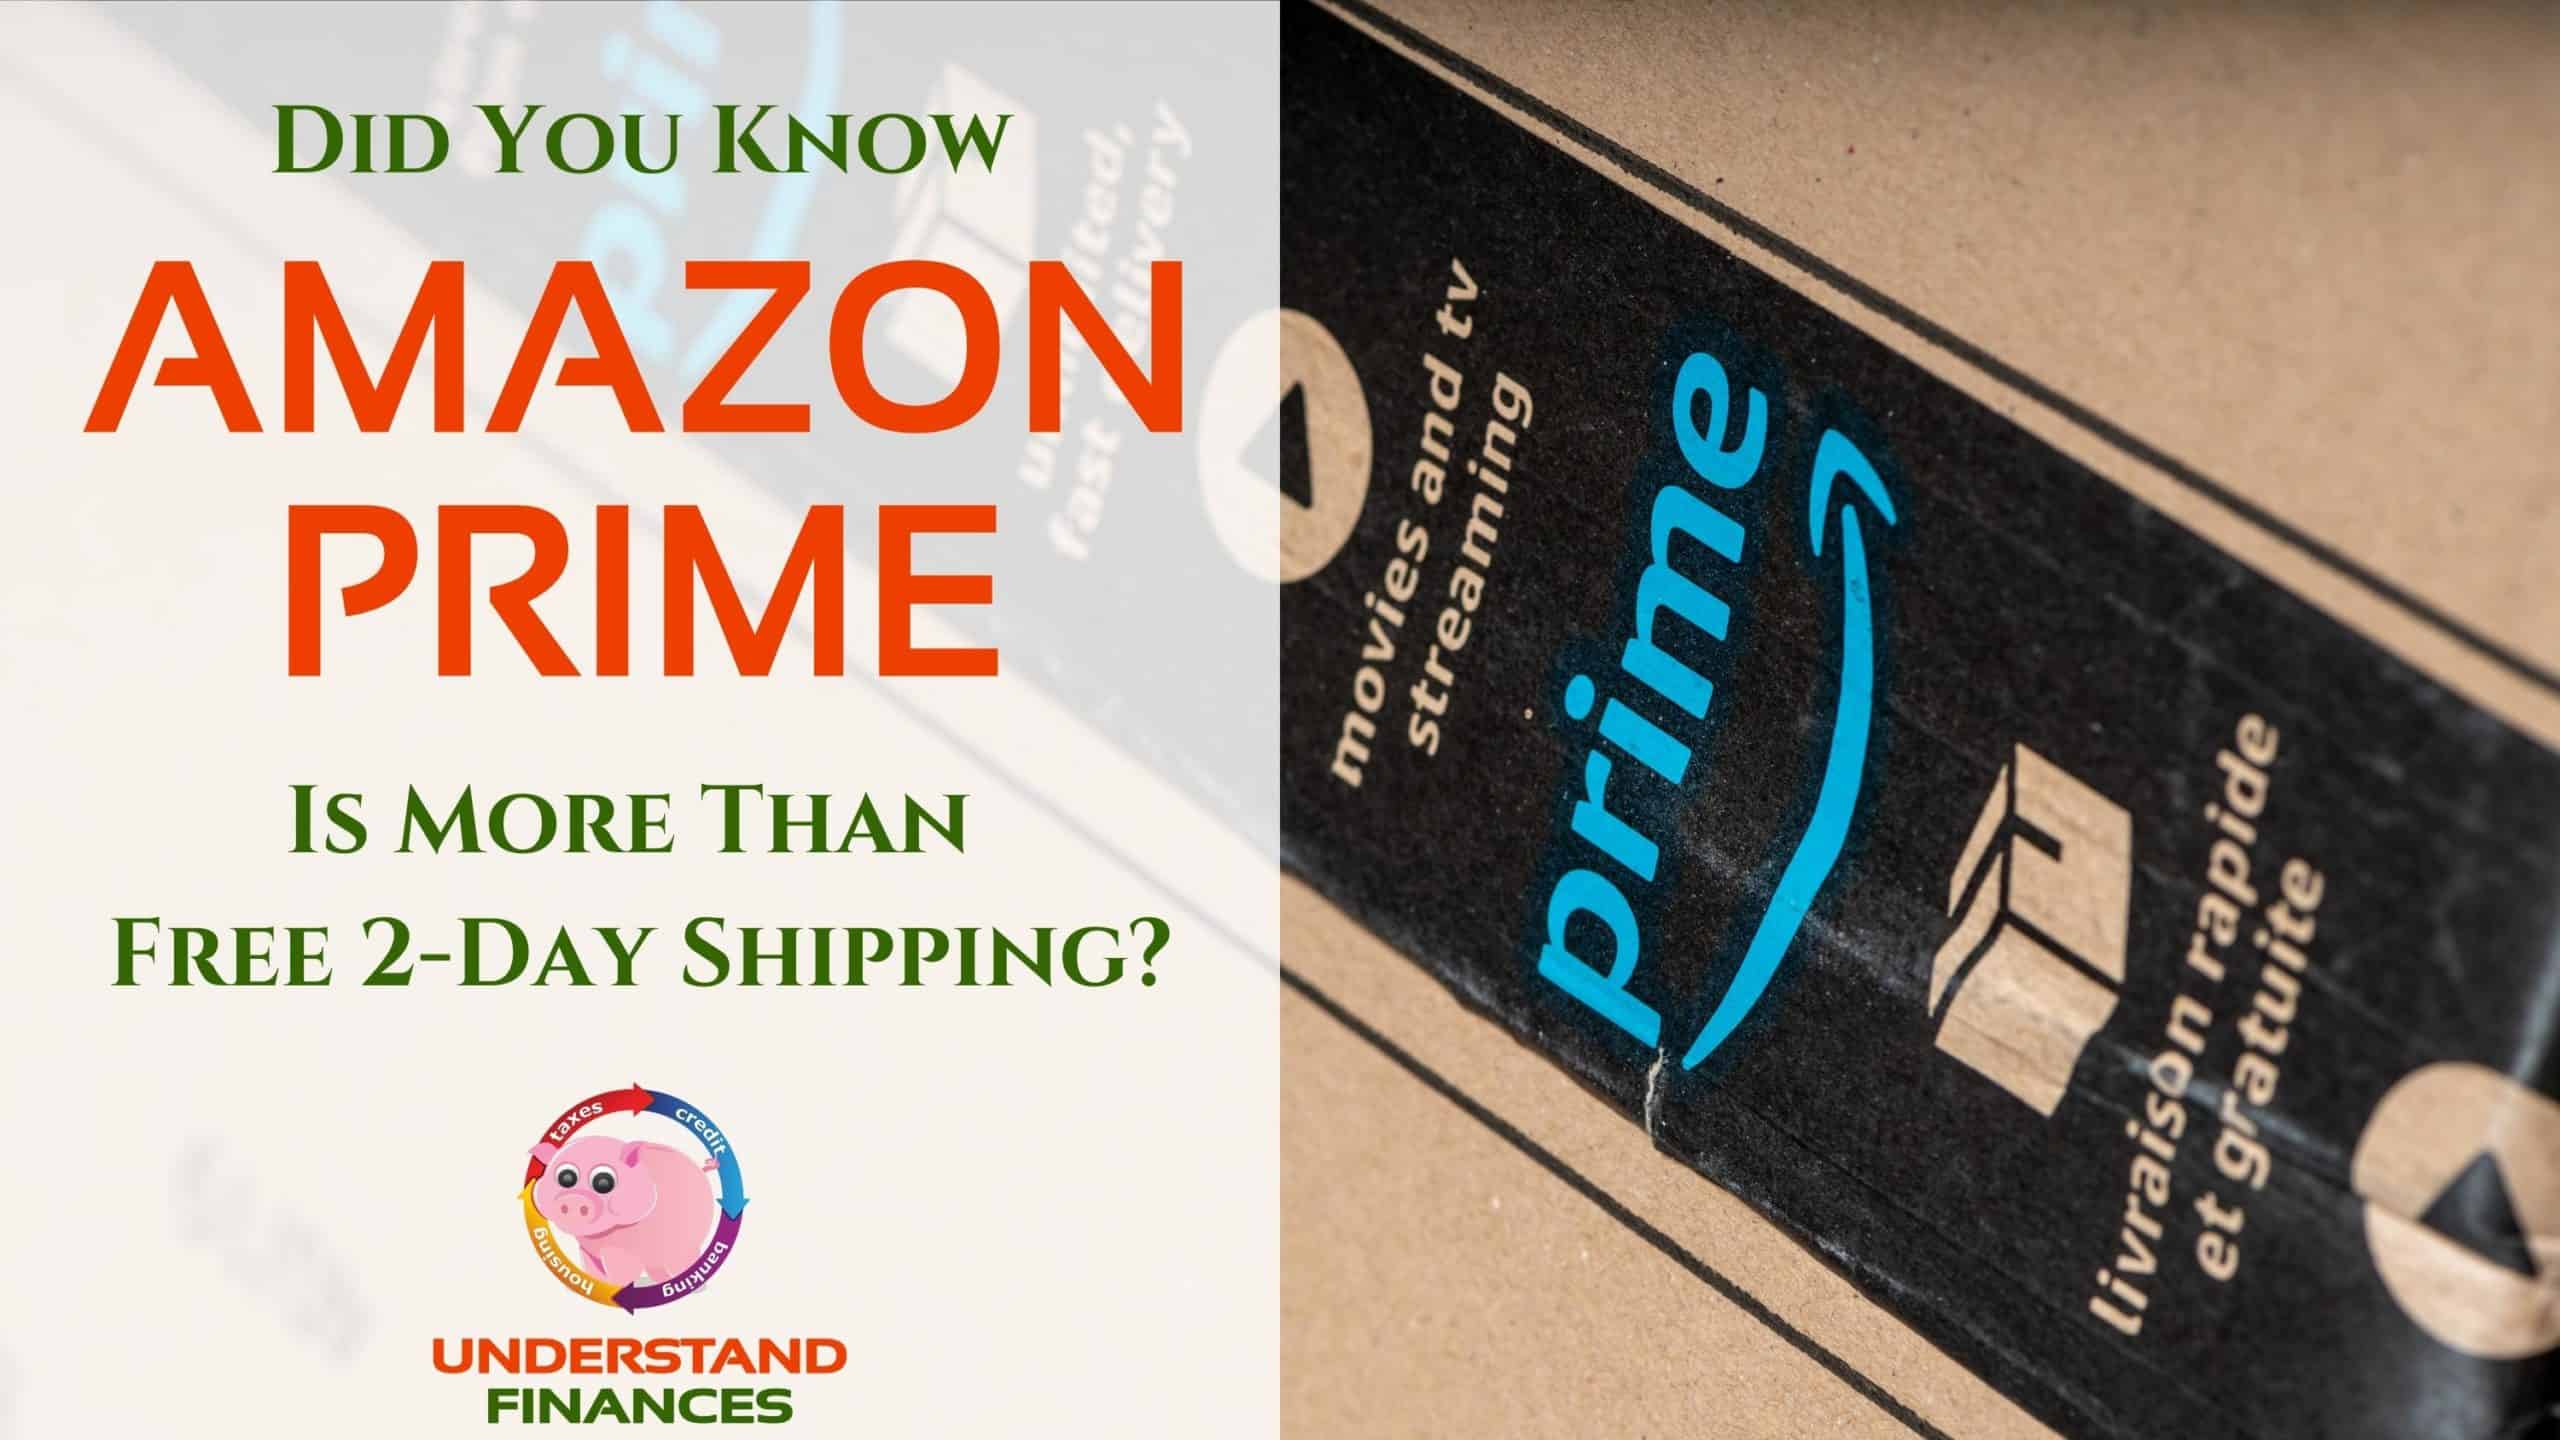 Did You Know Amazon Prime Is More Than Free 2-Day Shipping?